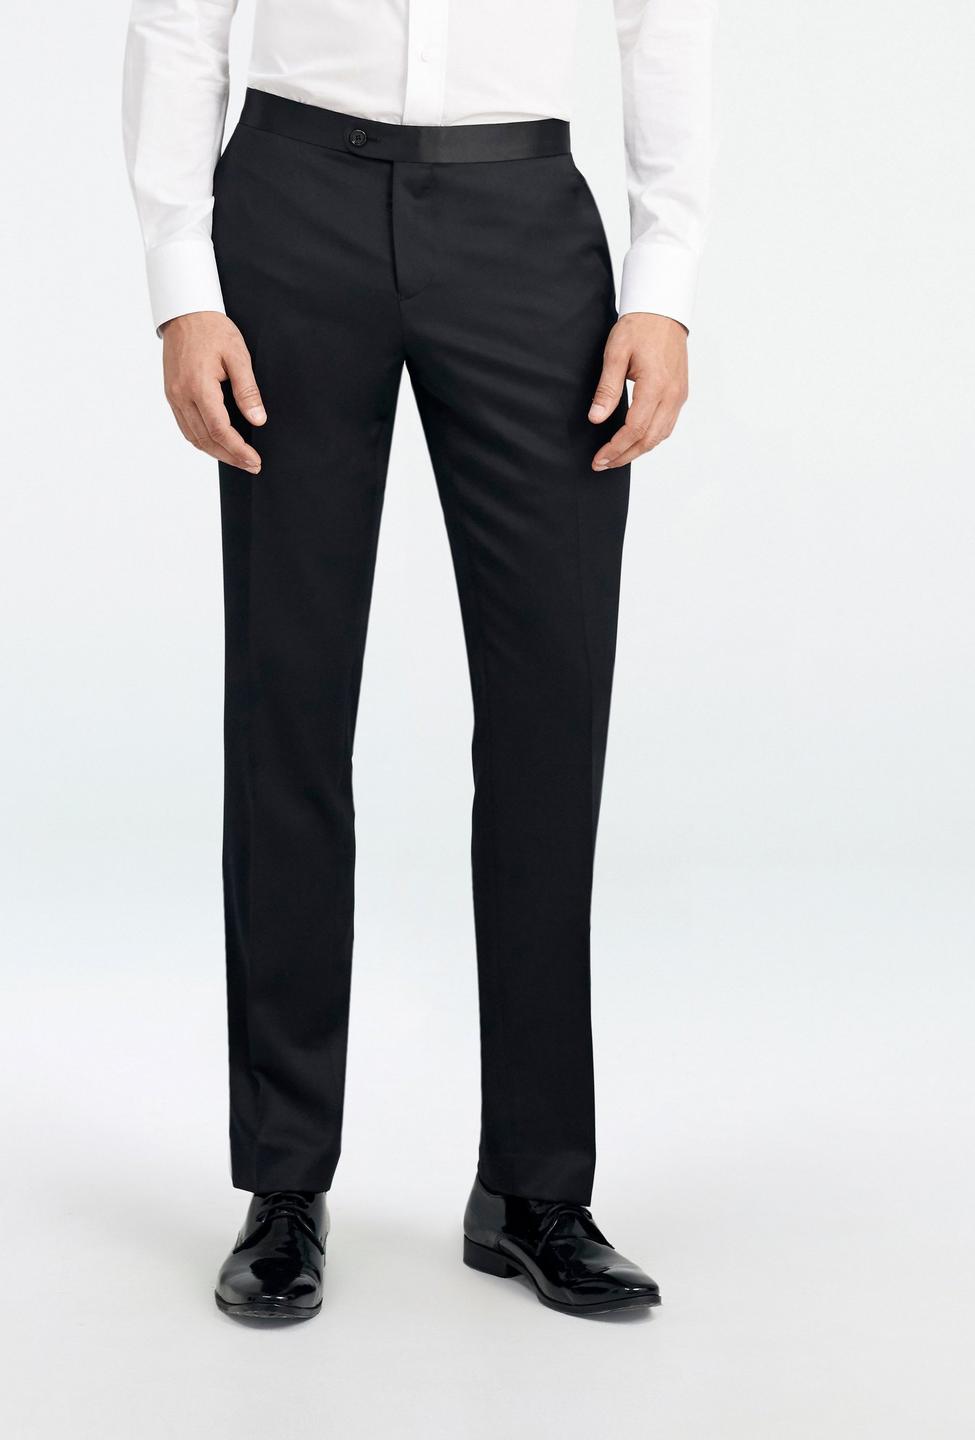 Black pants - Hampton Solid Design from Tuxedo Indochino Collection